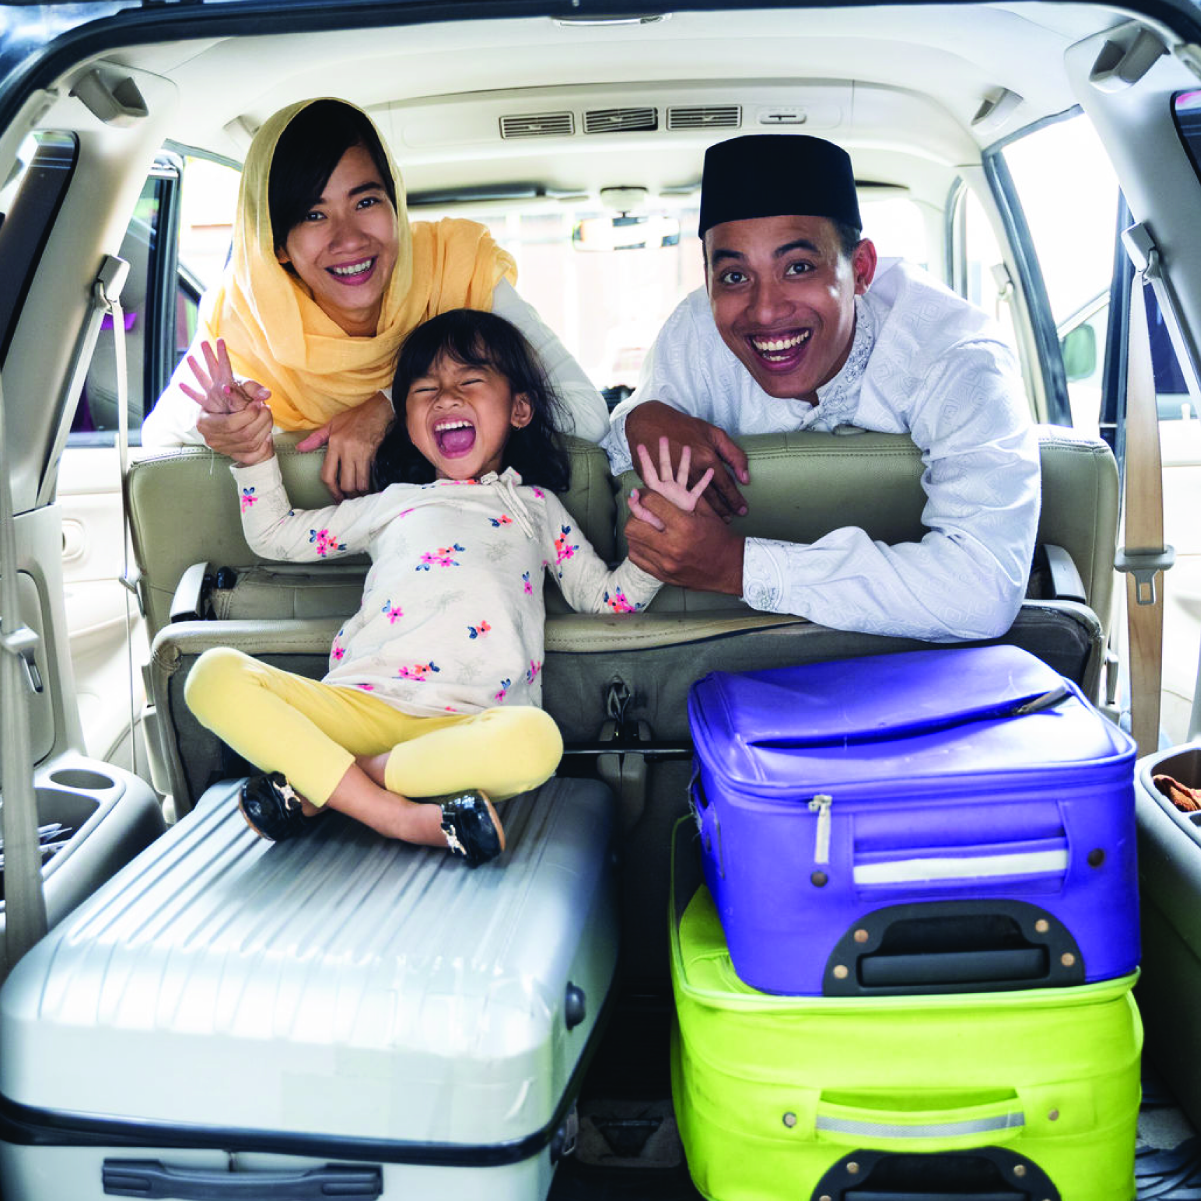 More Flexible, Car Rental in High Demand Ahead of Homebound Trips